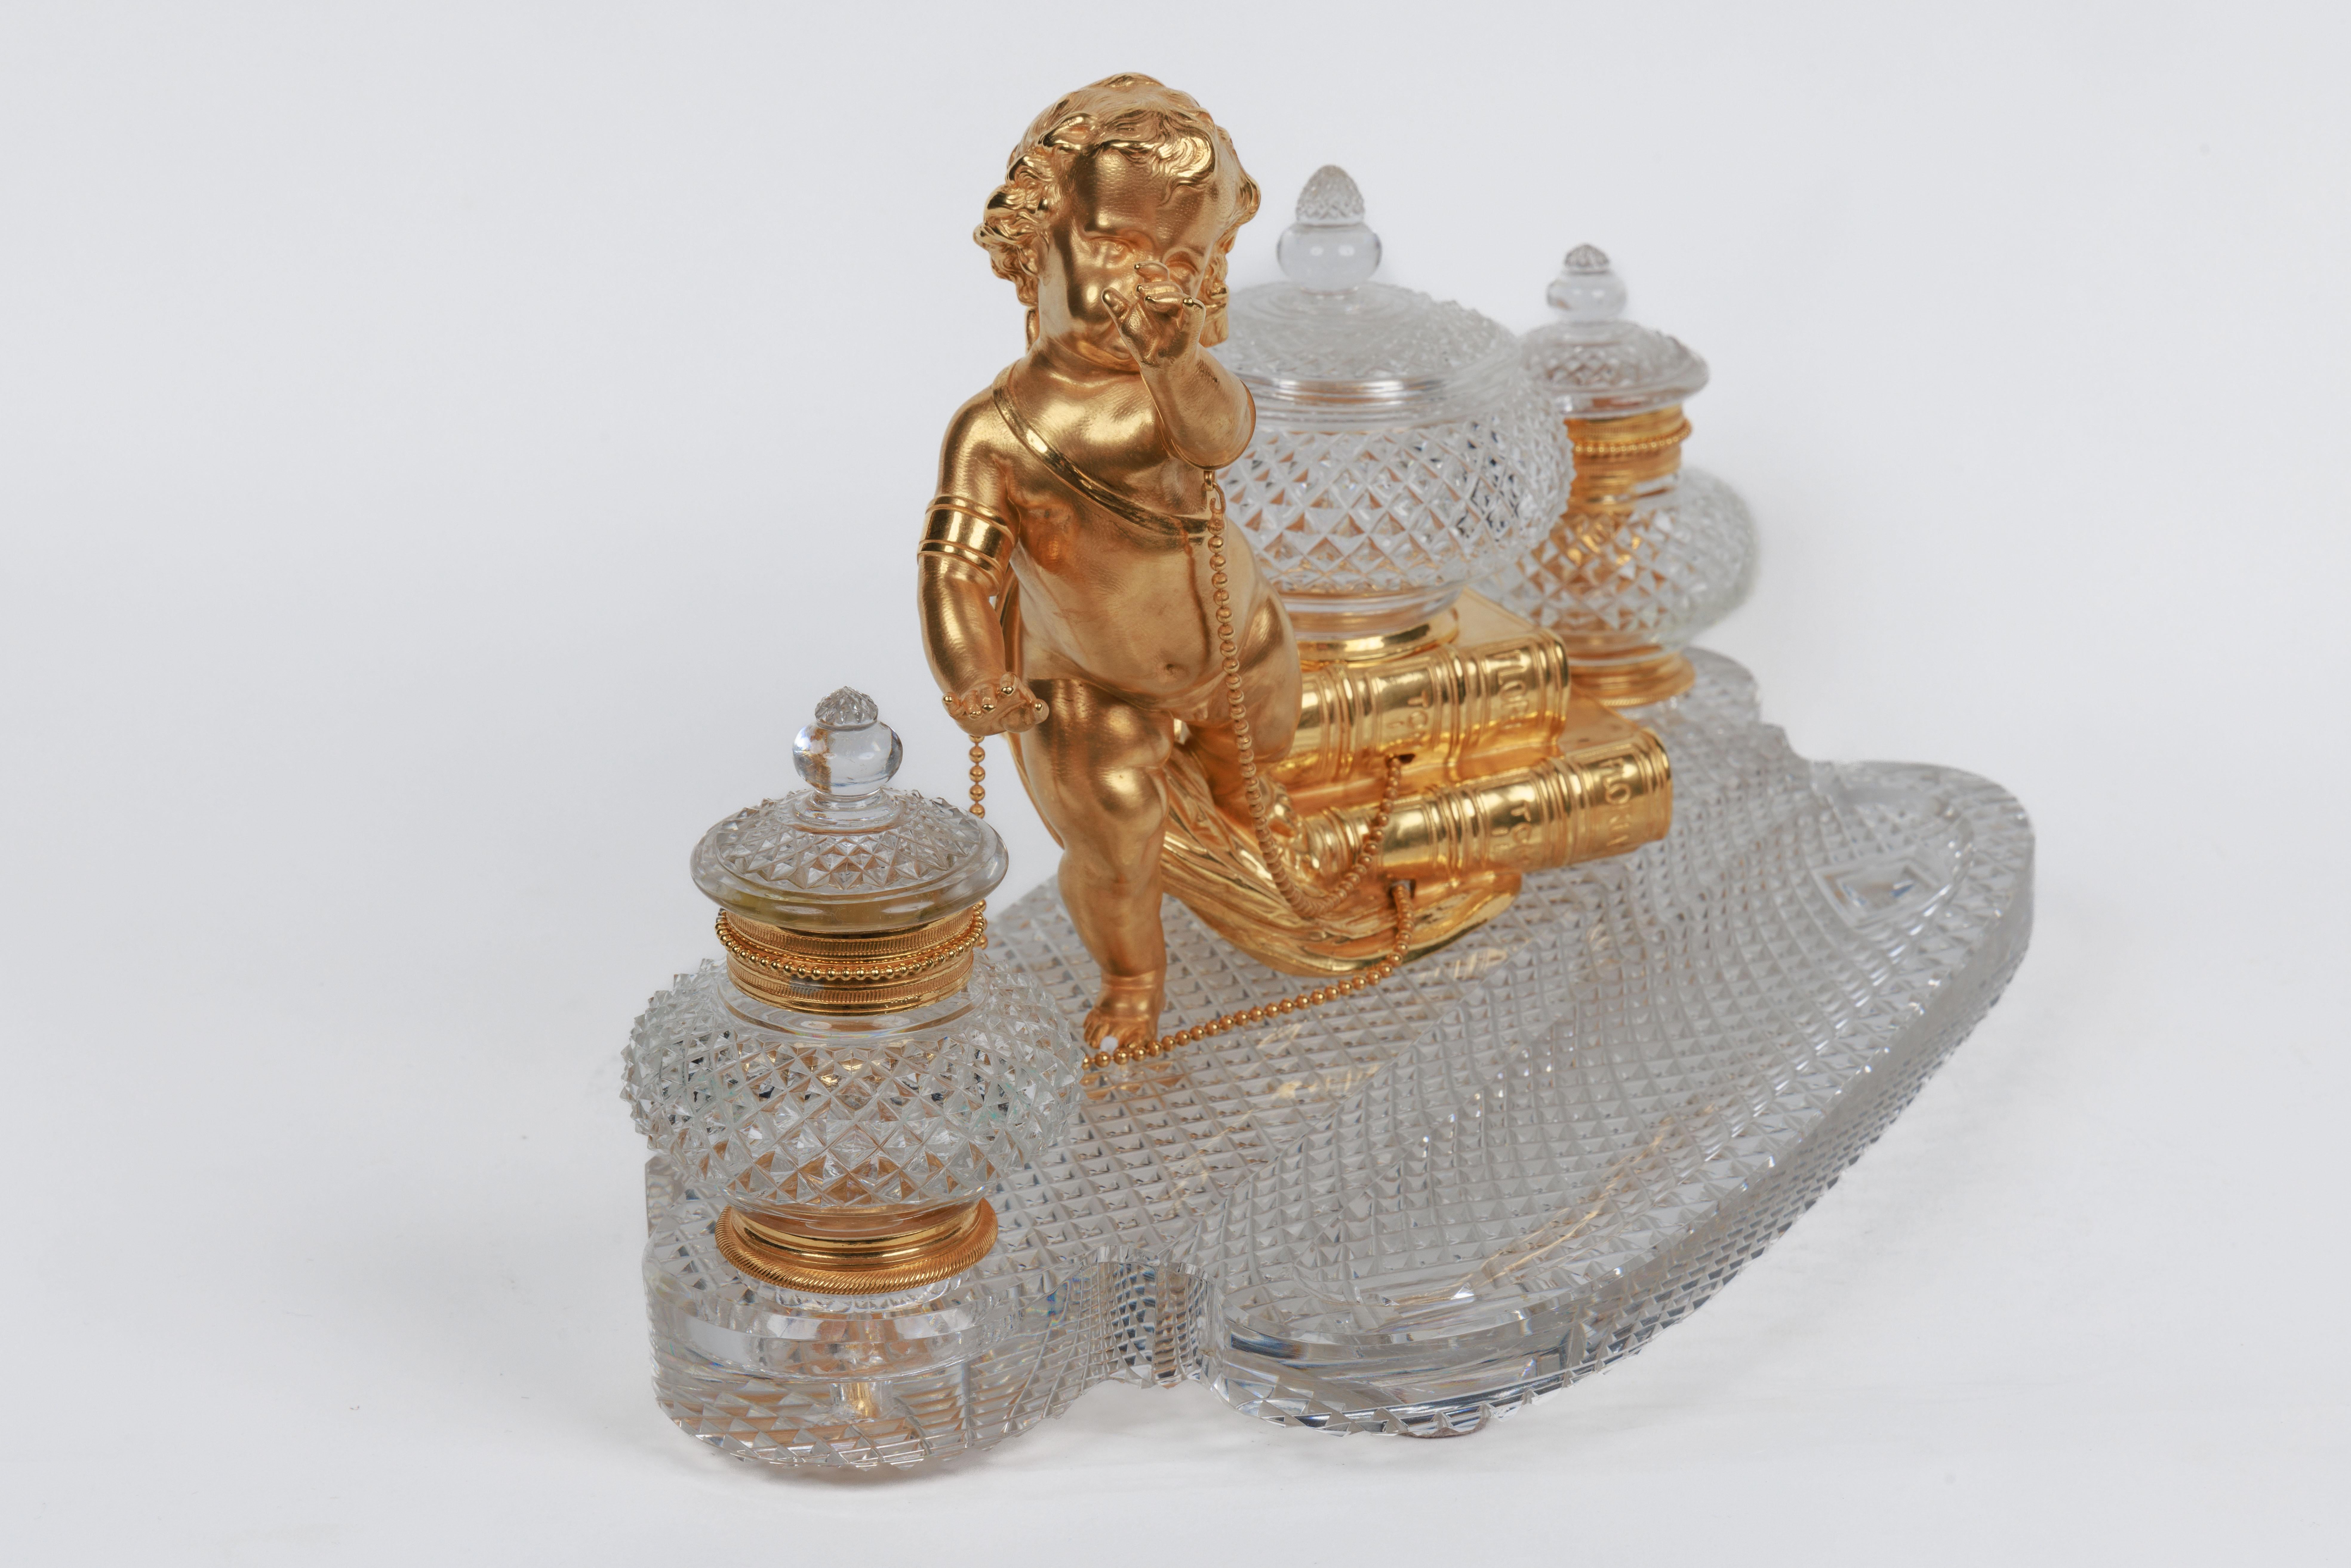 A rare French Ormolu and diamond-cut crystal figural inkwell Encrier by Baccarat, circa 1875.

Depicting a cherub with books, with the finest ormolu mounts, this exquisite jewel-like quality diamond-cut crystal make this inkwell the best of its